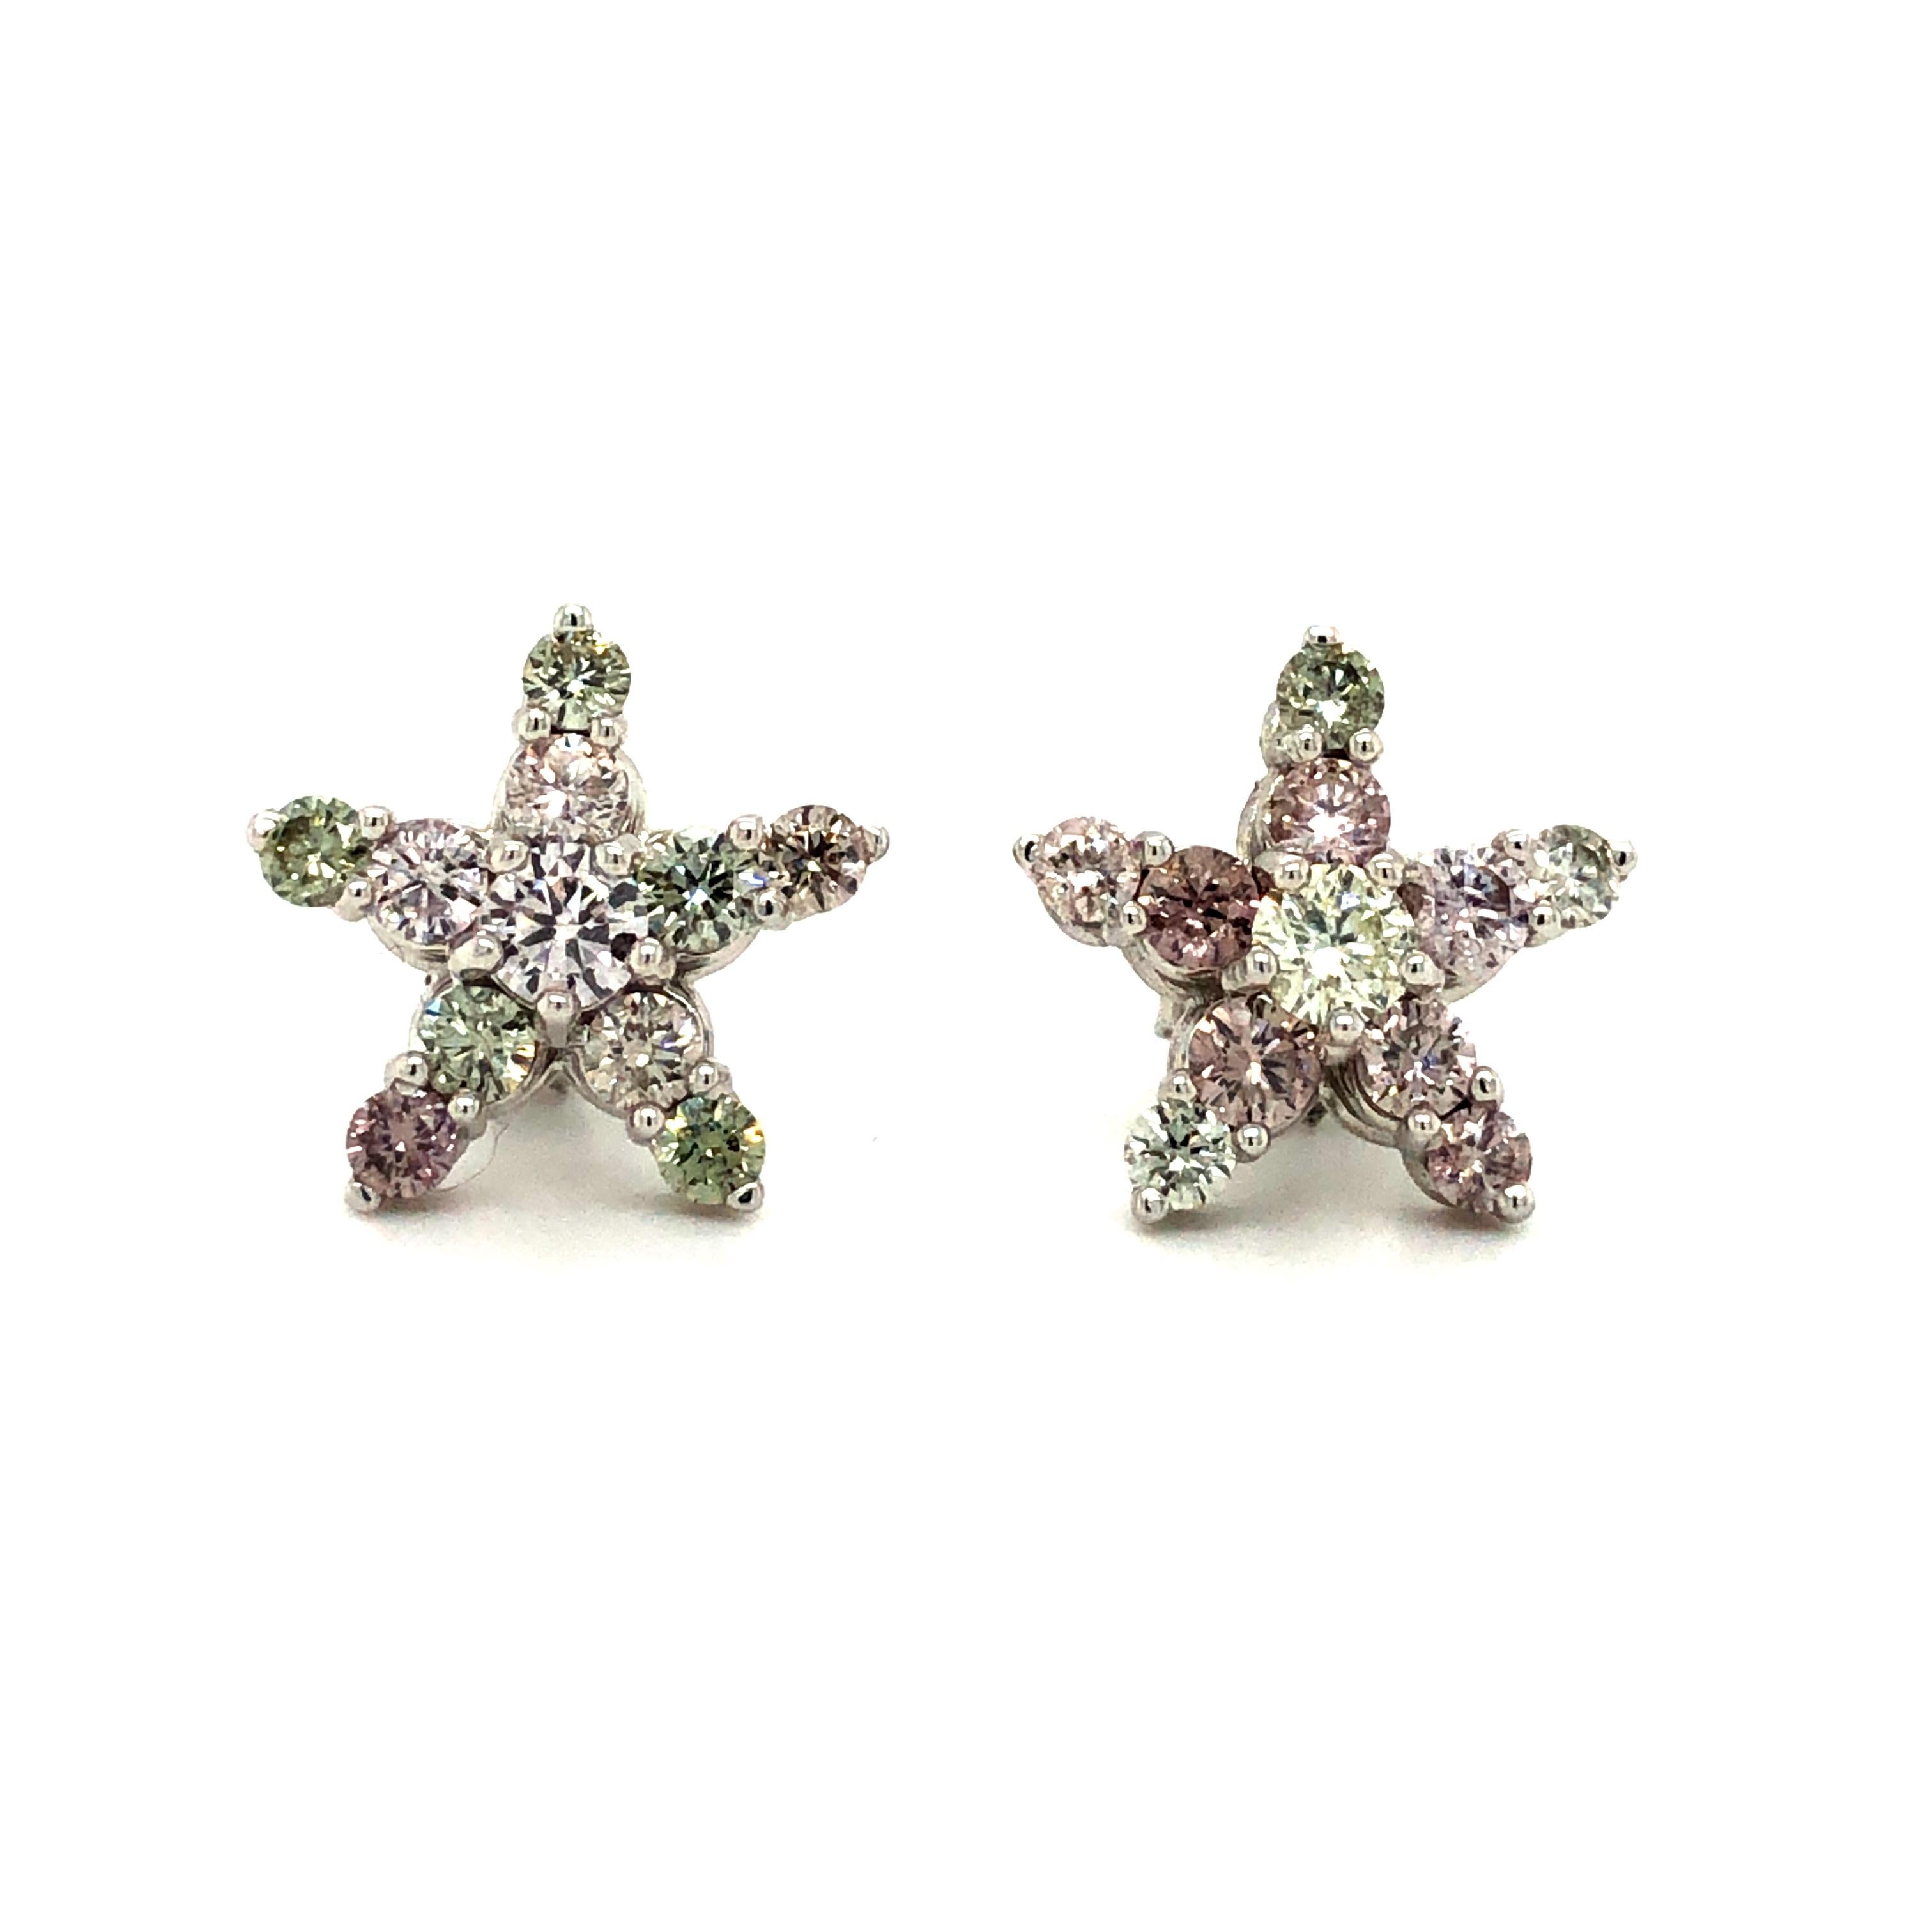 Offered here is a one of a kind star earring, made in solid 18 kt white gold and prong set with 22 natural earth mined pink, green and white diamonds weighing 2.10 carats in the pair, with G.I.A certificate.
Earring has a comfortable and secure push